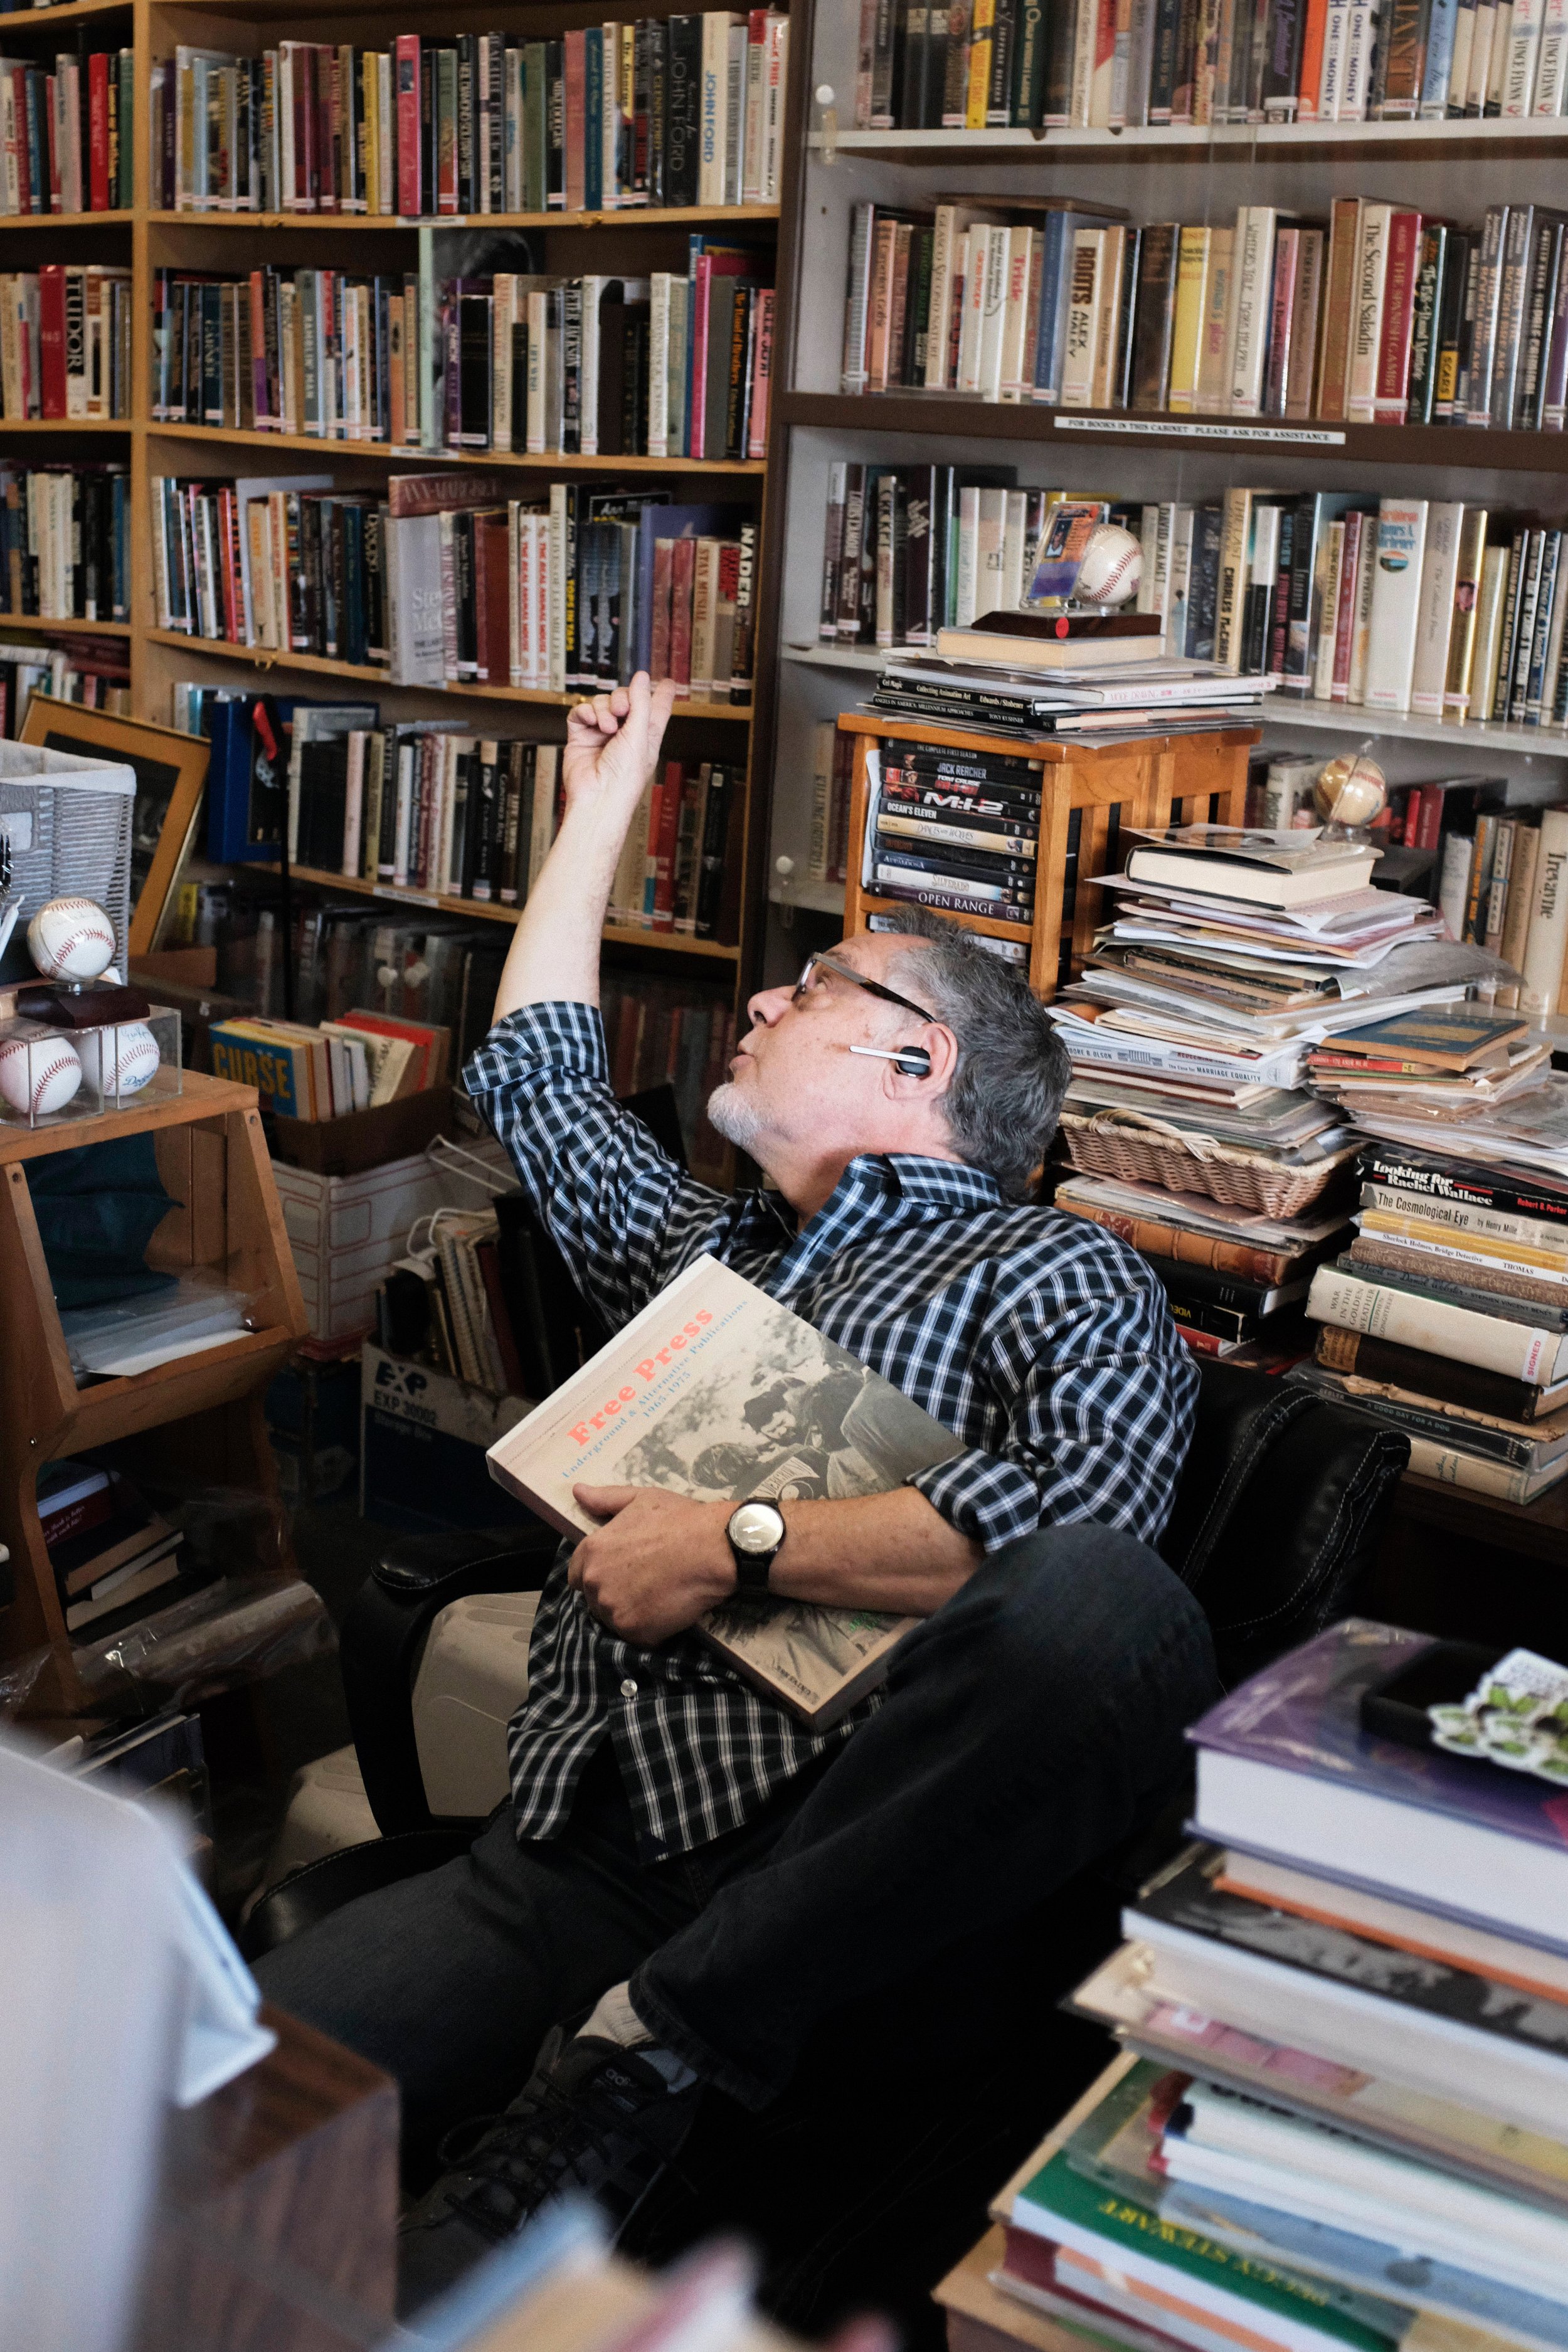  In conversation with a customer who is almost ready to check out their items, David Kaye points out a section that he suggests they should check out. He sits in his chair behind the desk that is surrounded by a vast amount of books. David Kaye Books